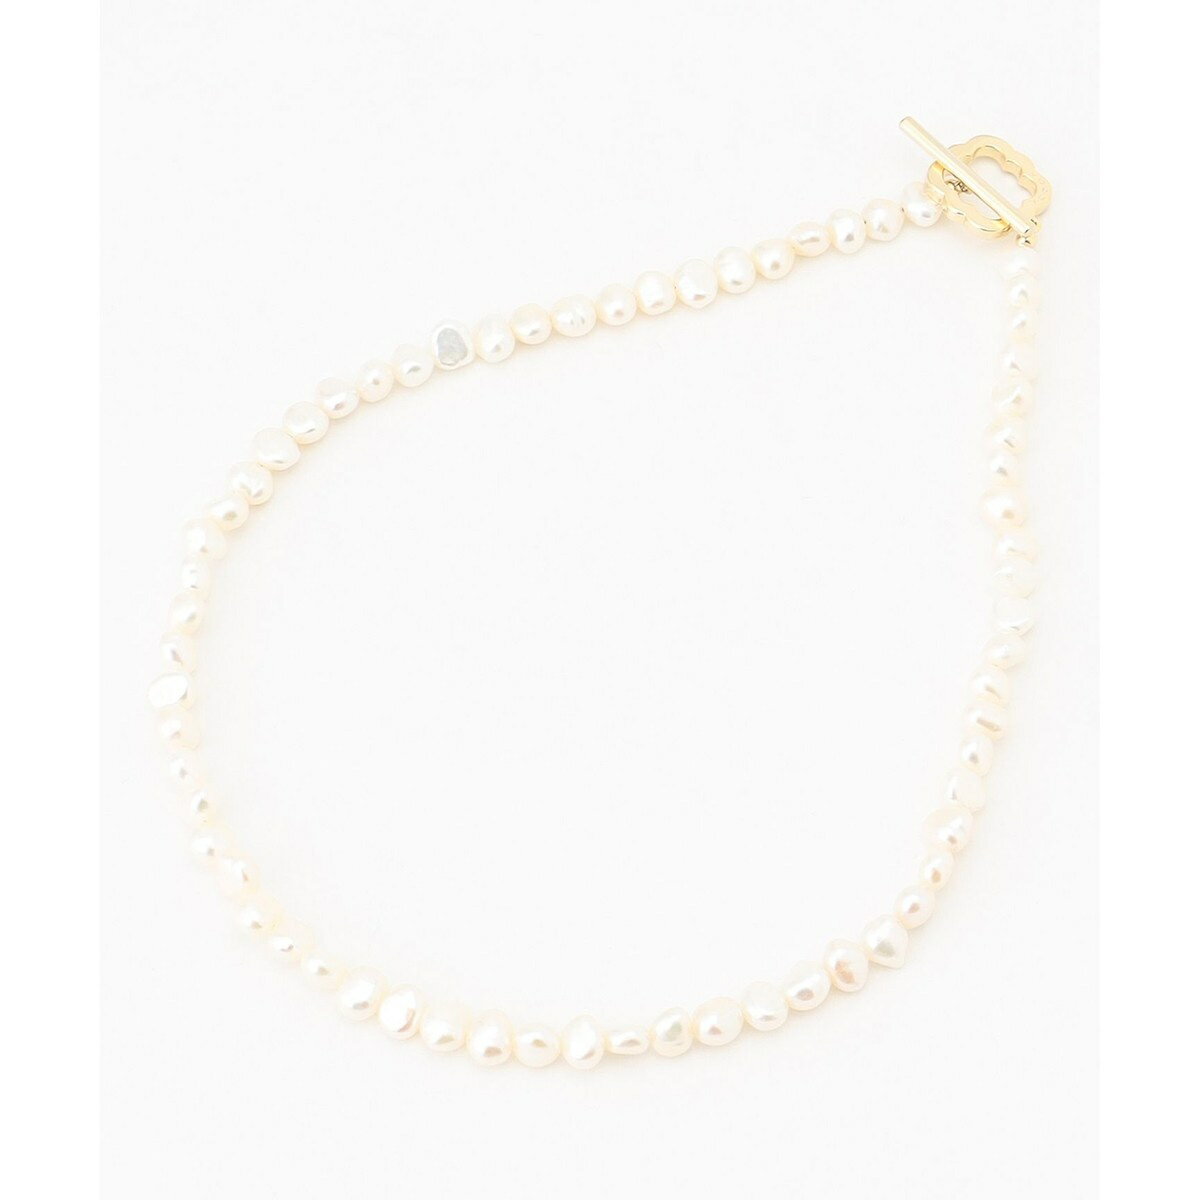 OPEN CLOVER PEARL NECKLACE obNp[ 2WAY lbNX^gbJiTOCCAj